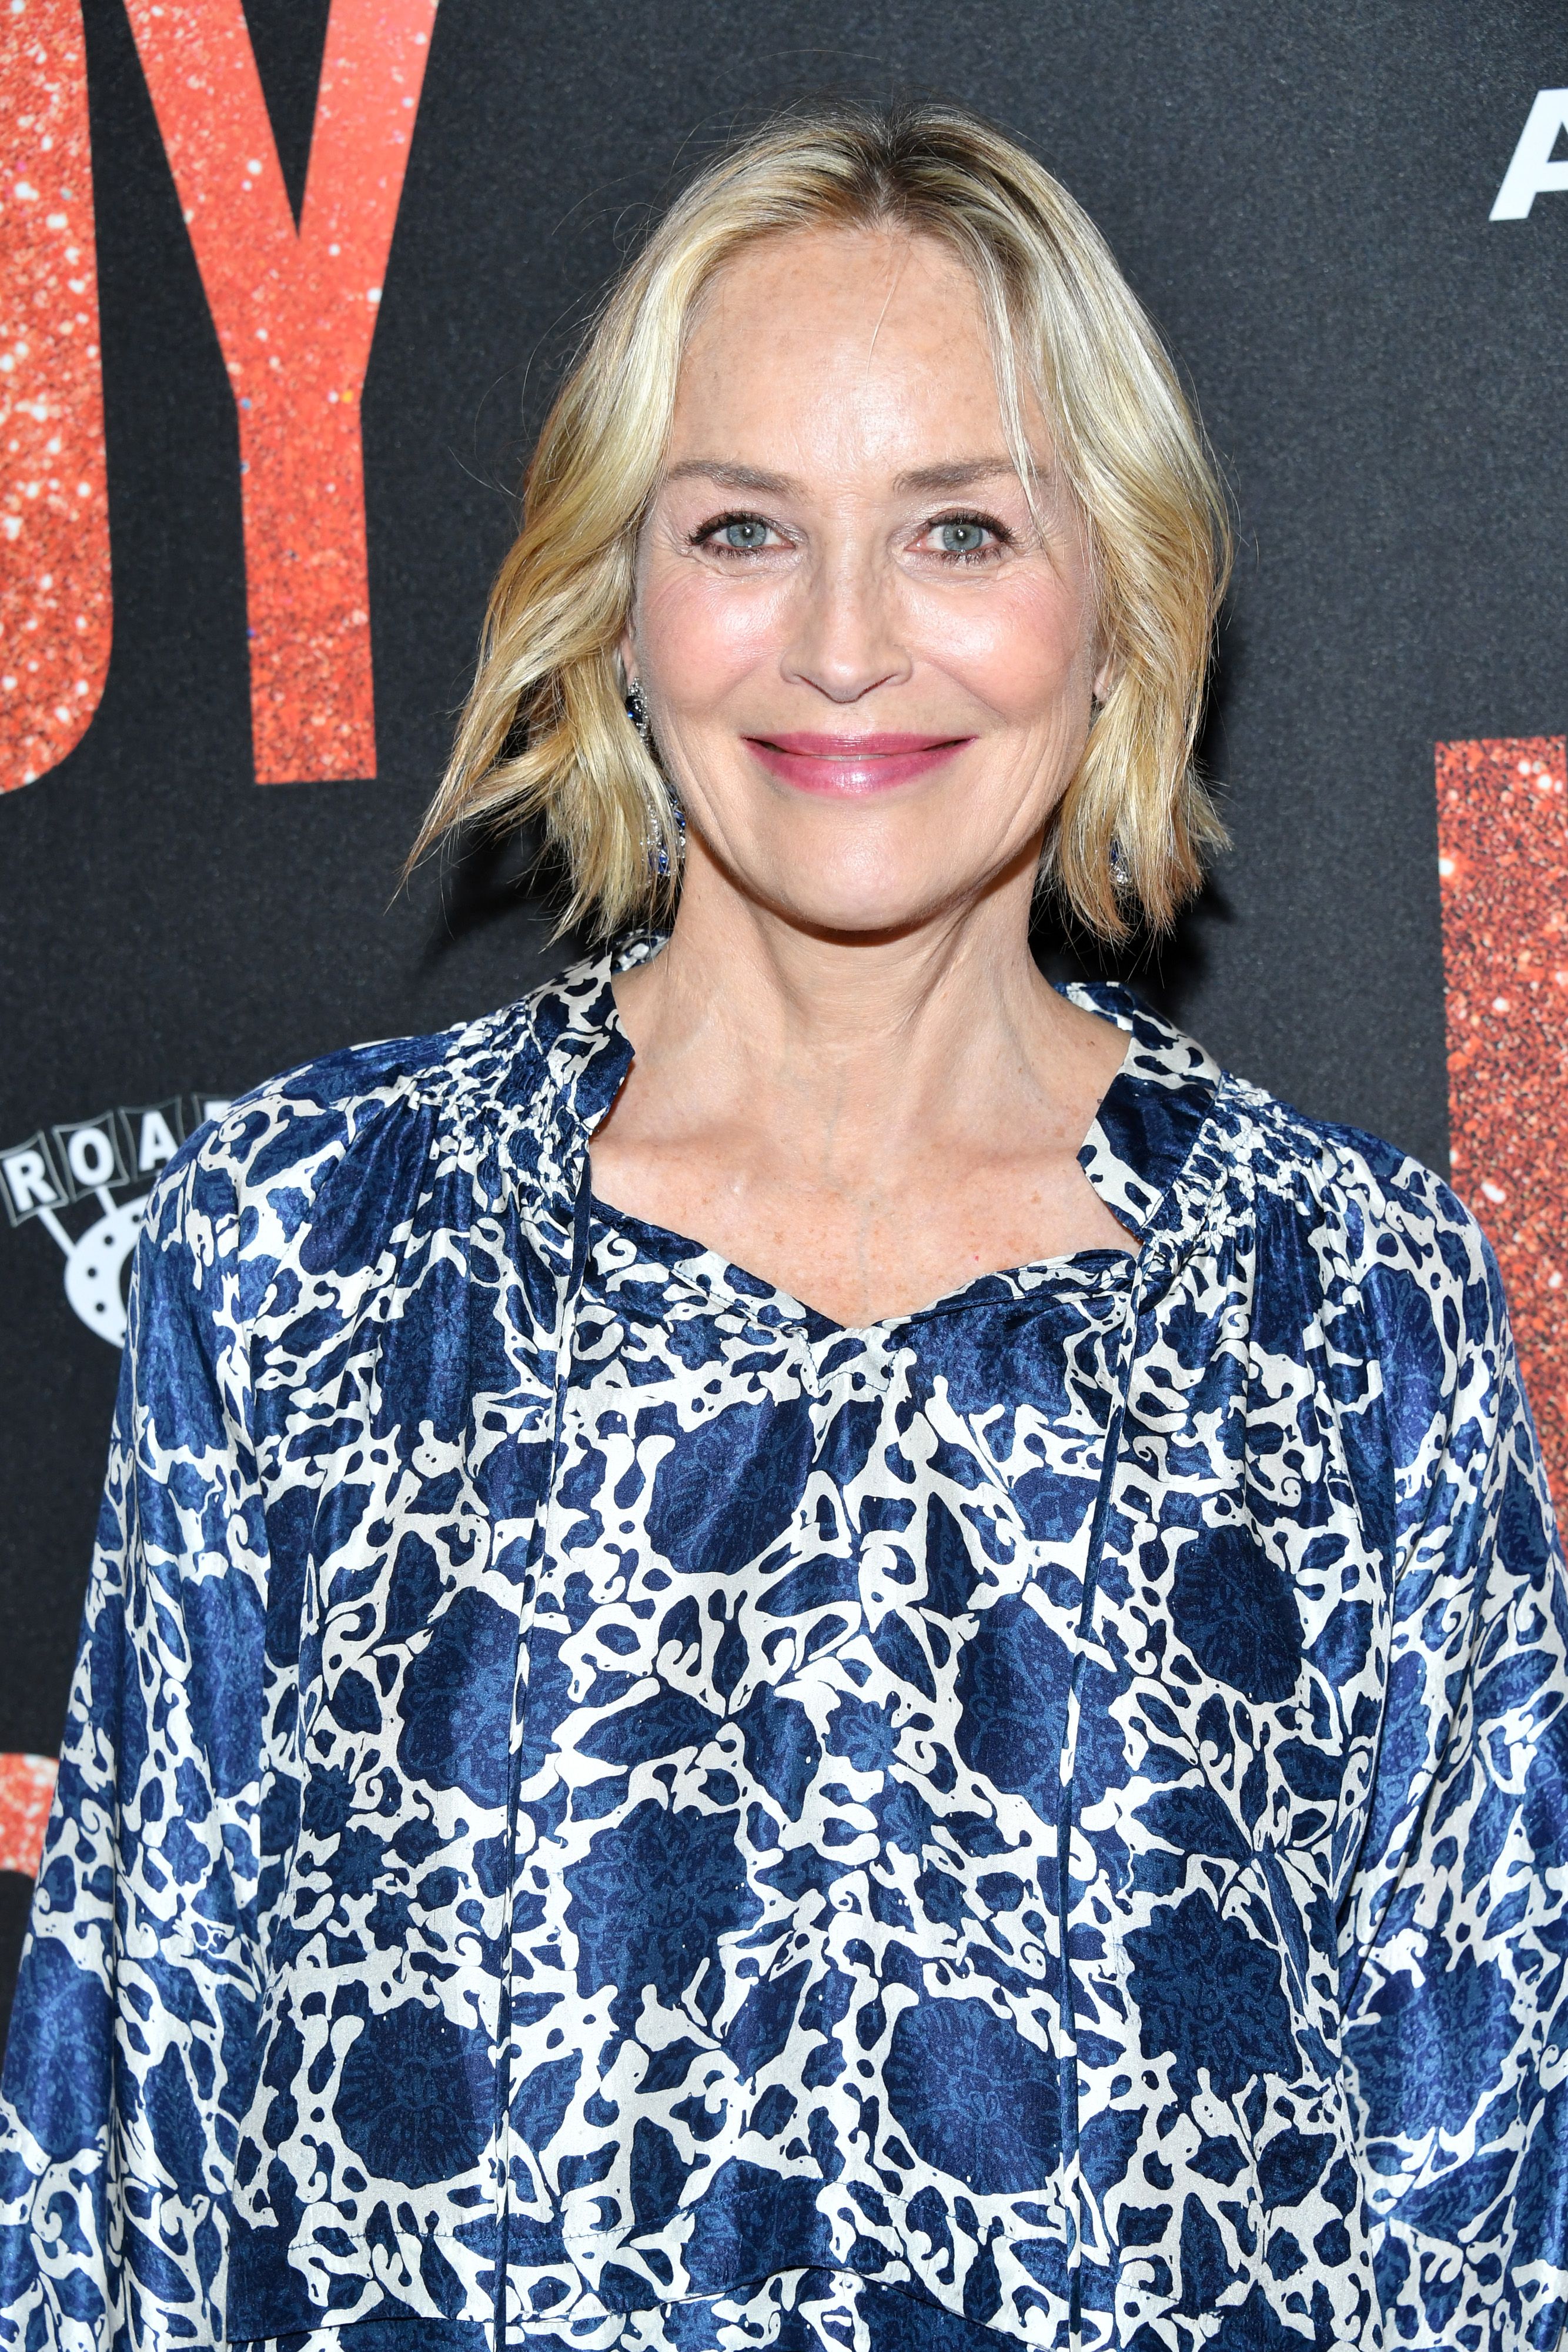 Sharon Stone attends the LA premiere of Roadside Attraction's "Judy" at Samuel Goldwyn Theater on September 19, 2019 in Beverly Hills, California. | Source: Getty Images